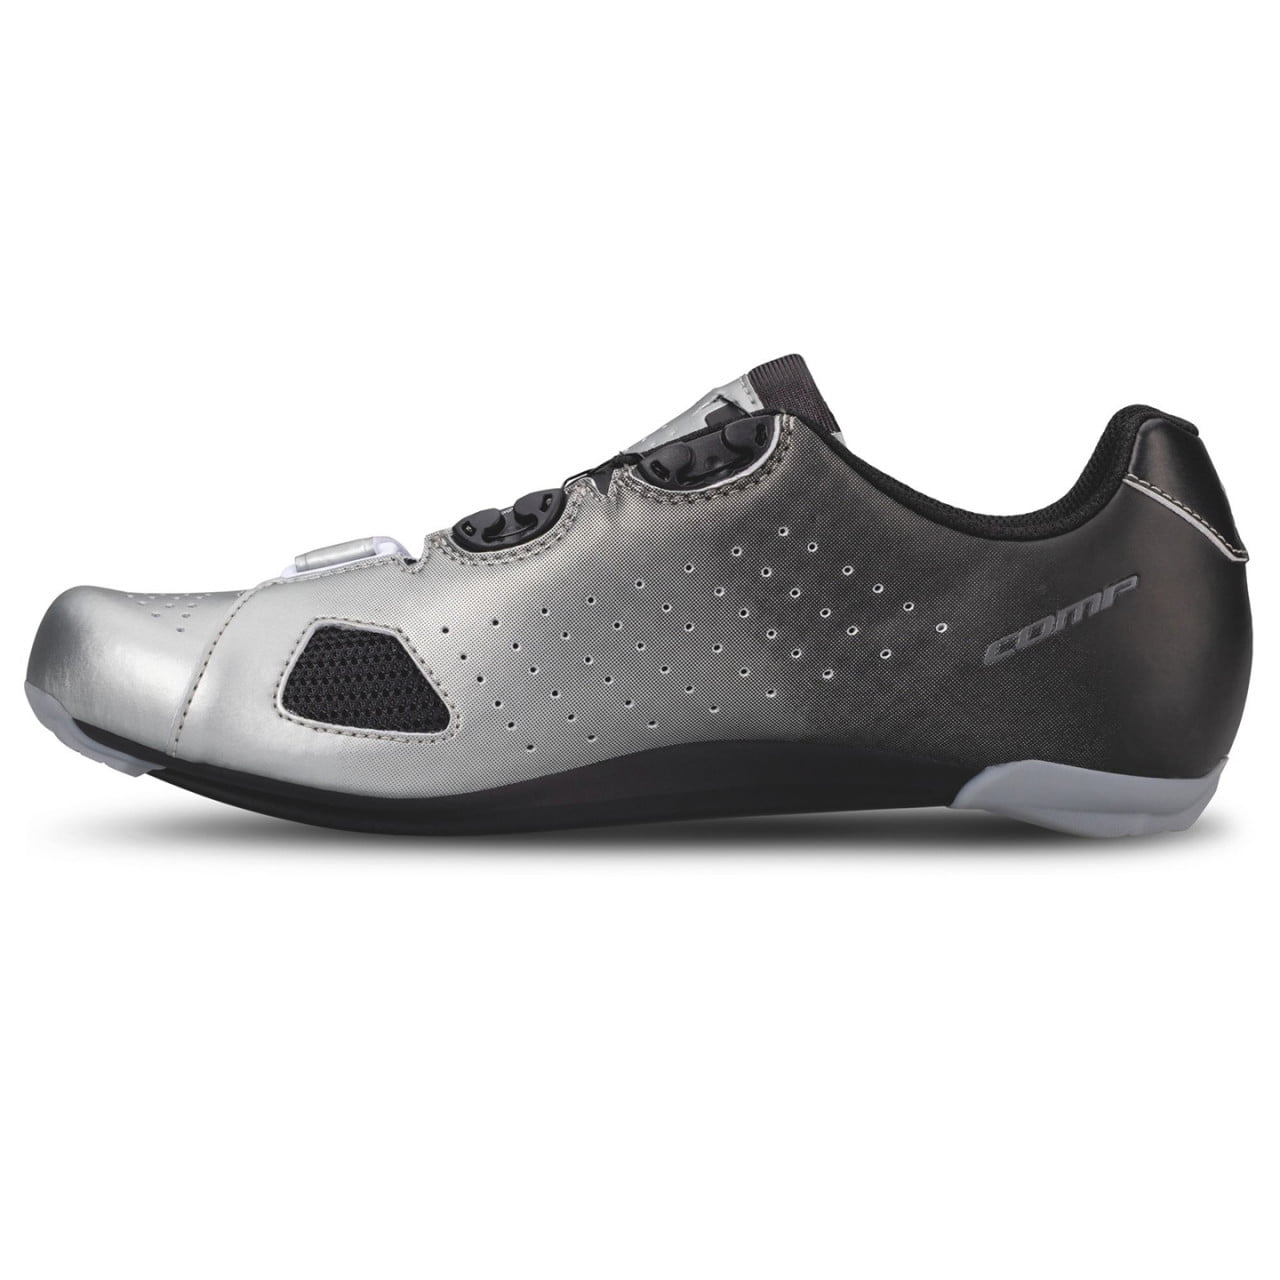 Chaussures route Road Comp Boa